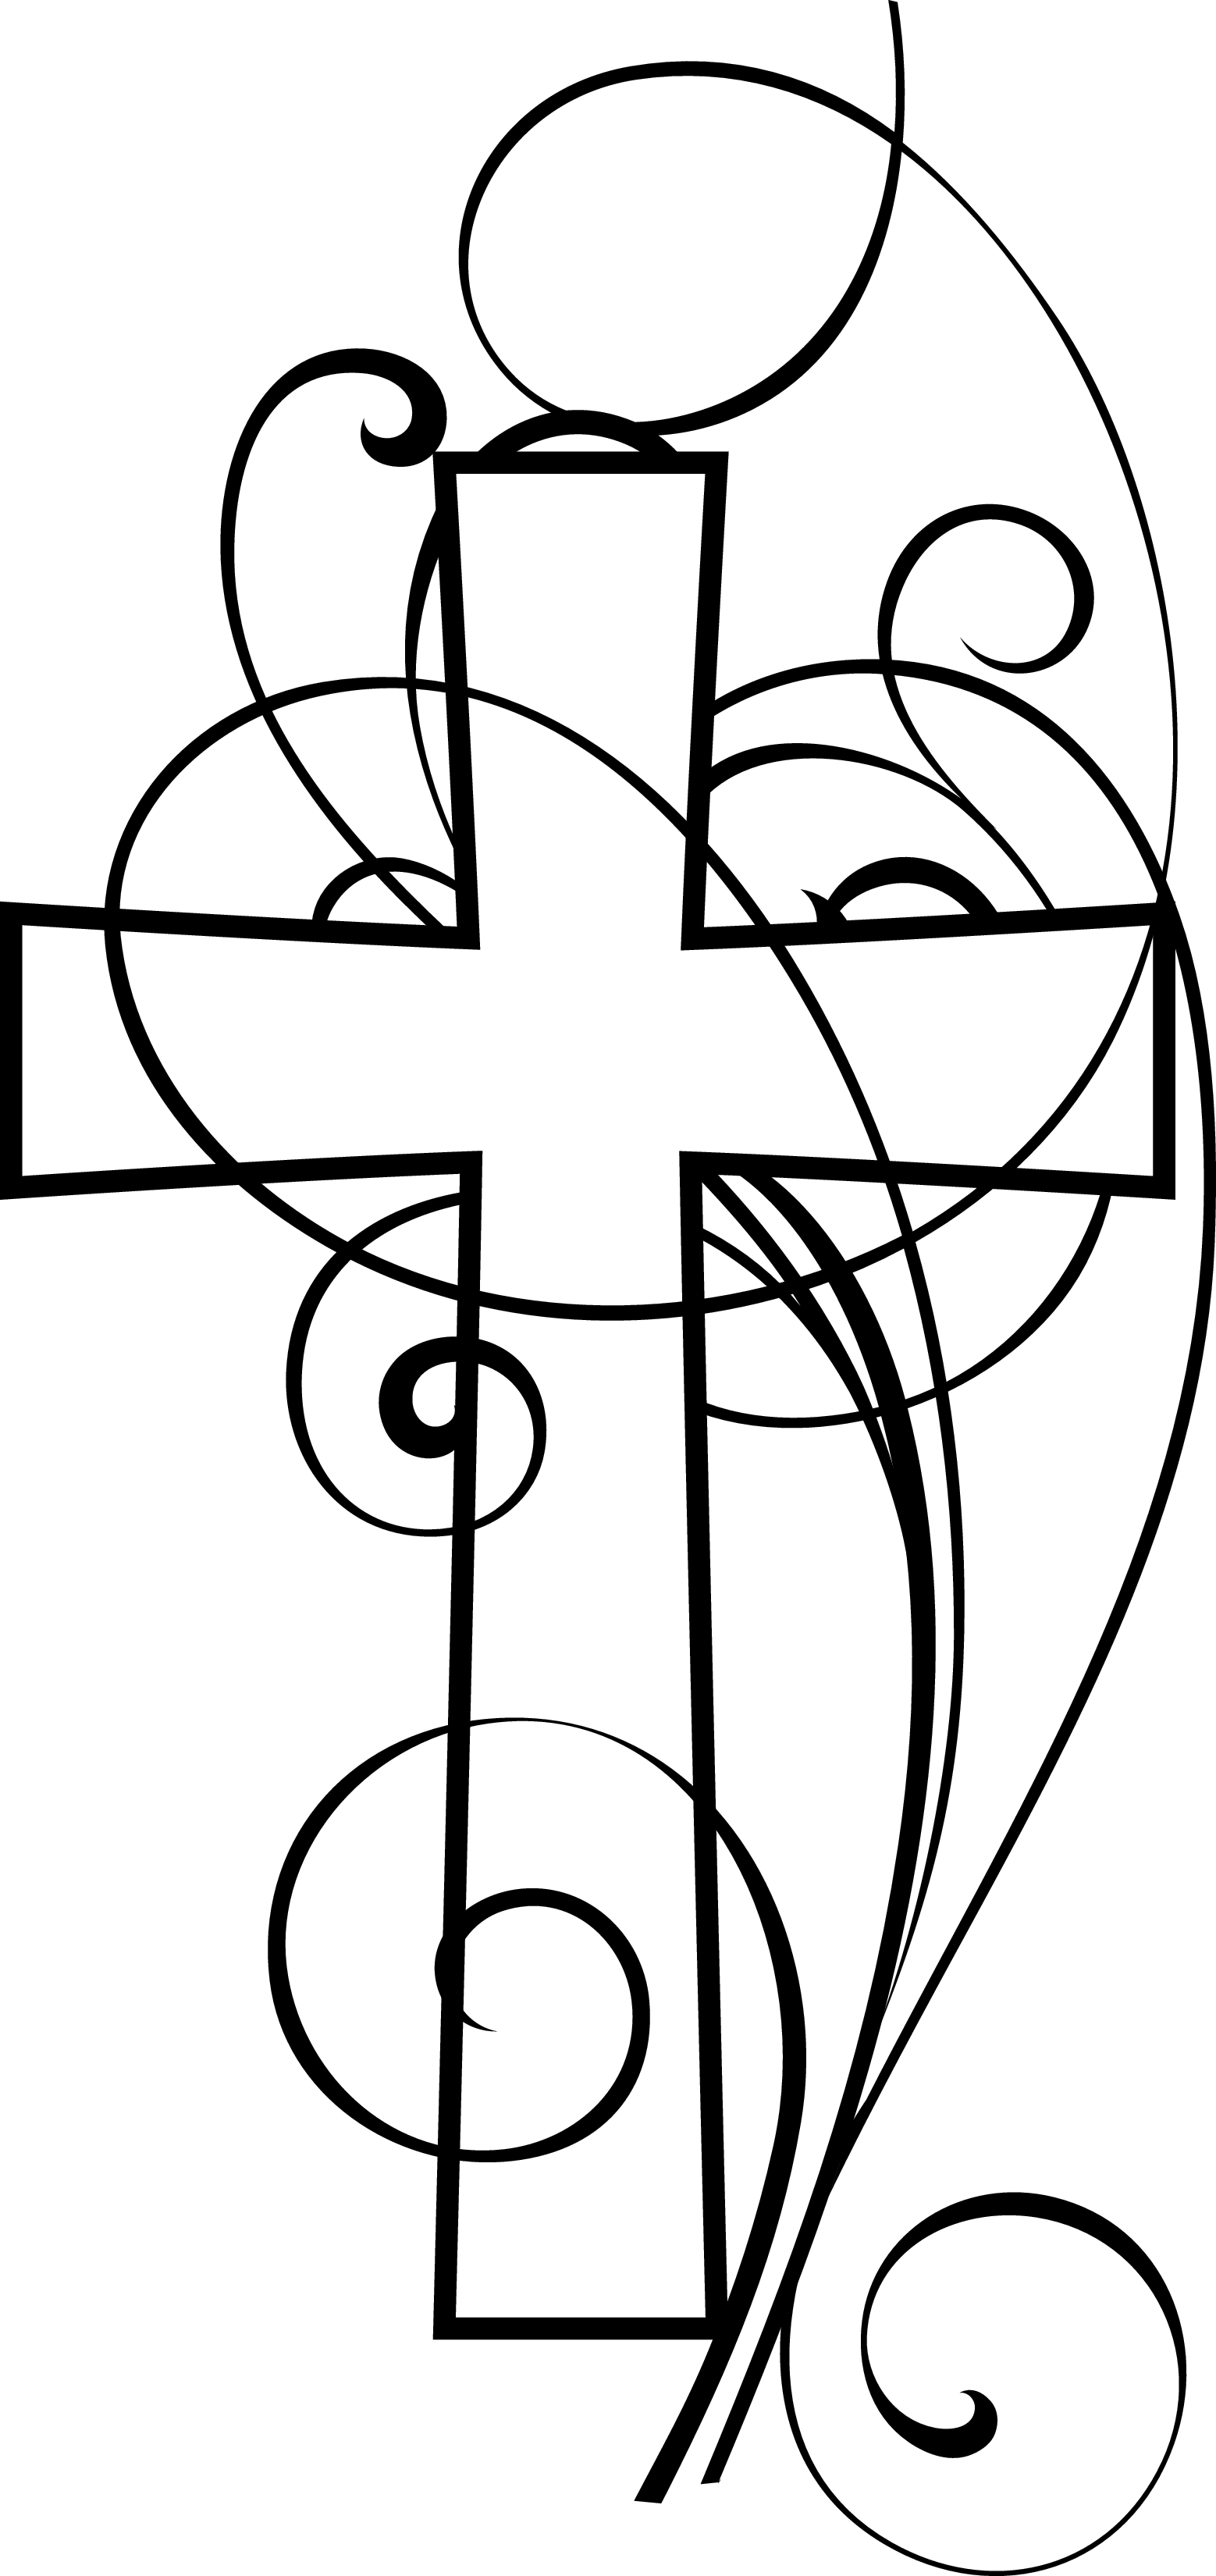 Black and white religious clipart clipart kid